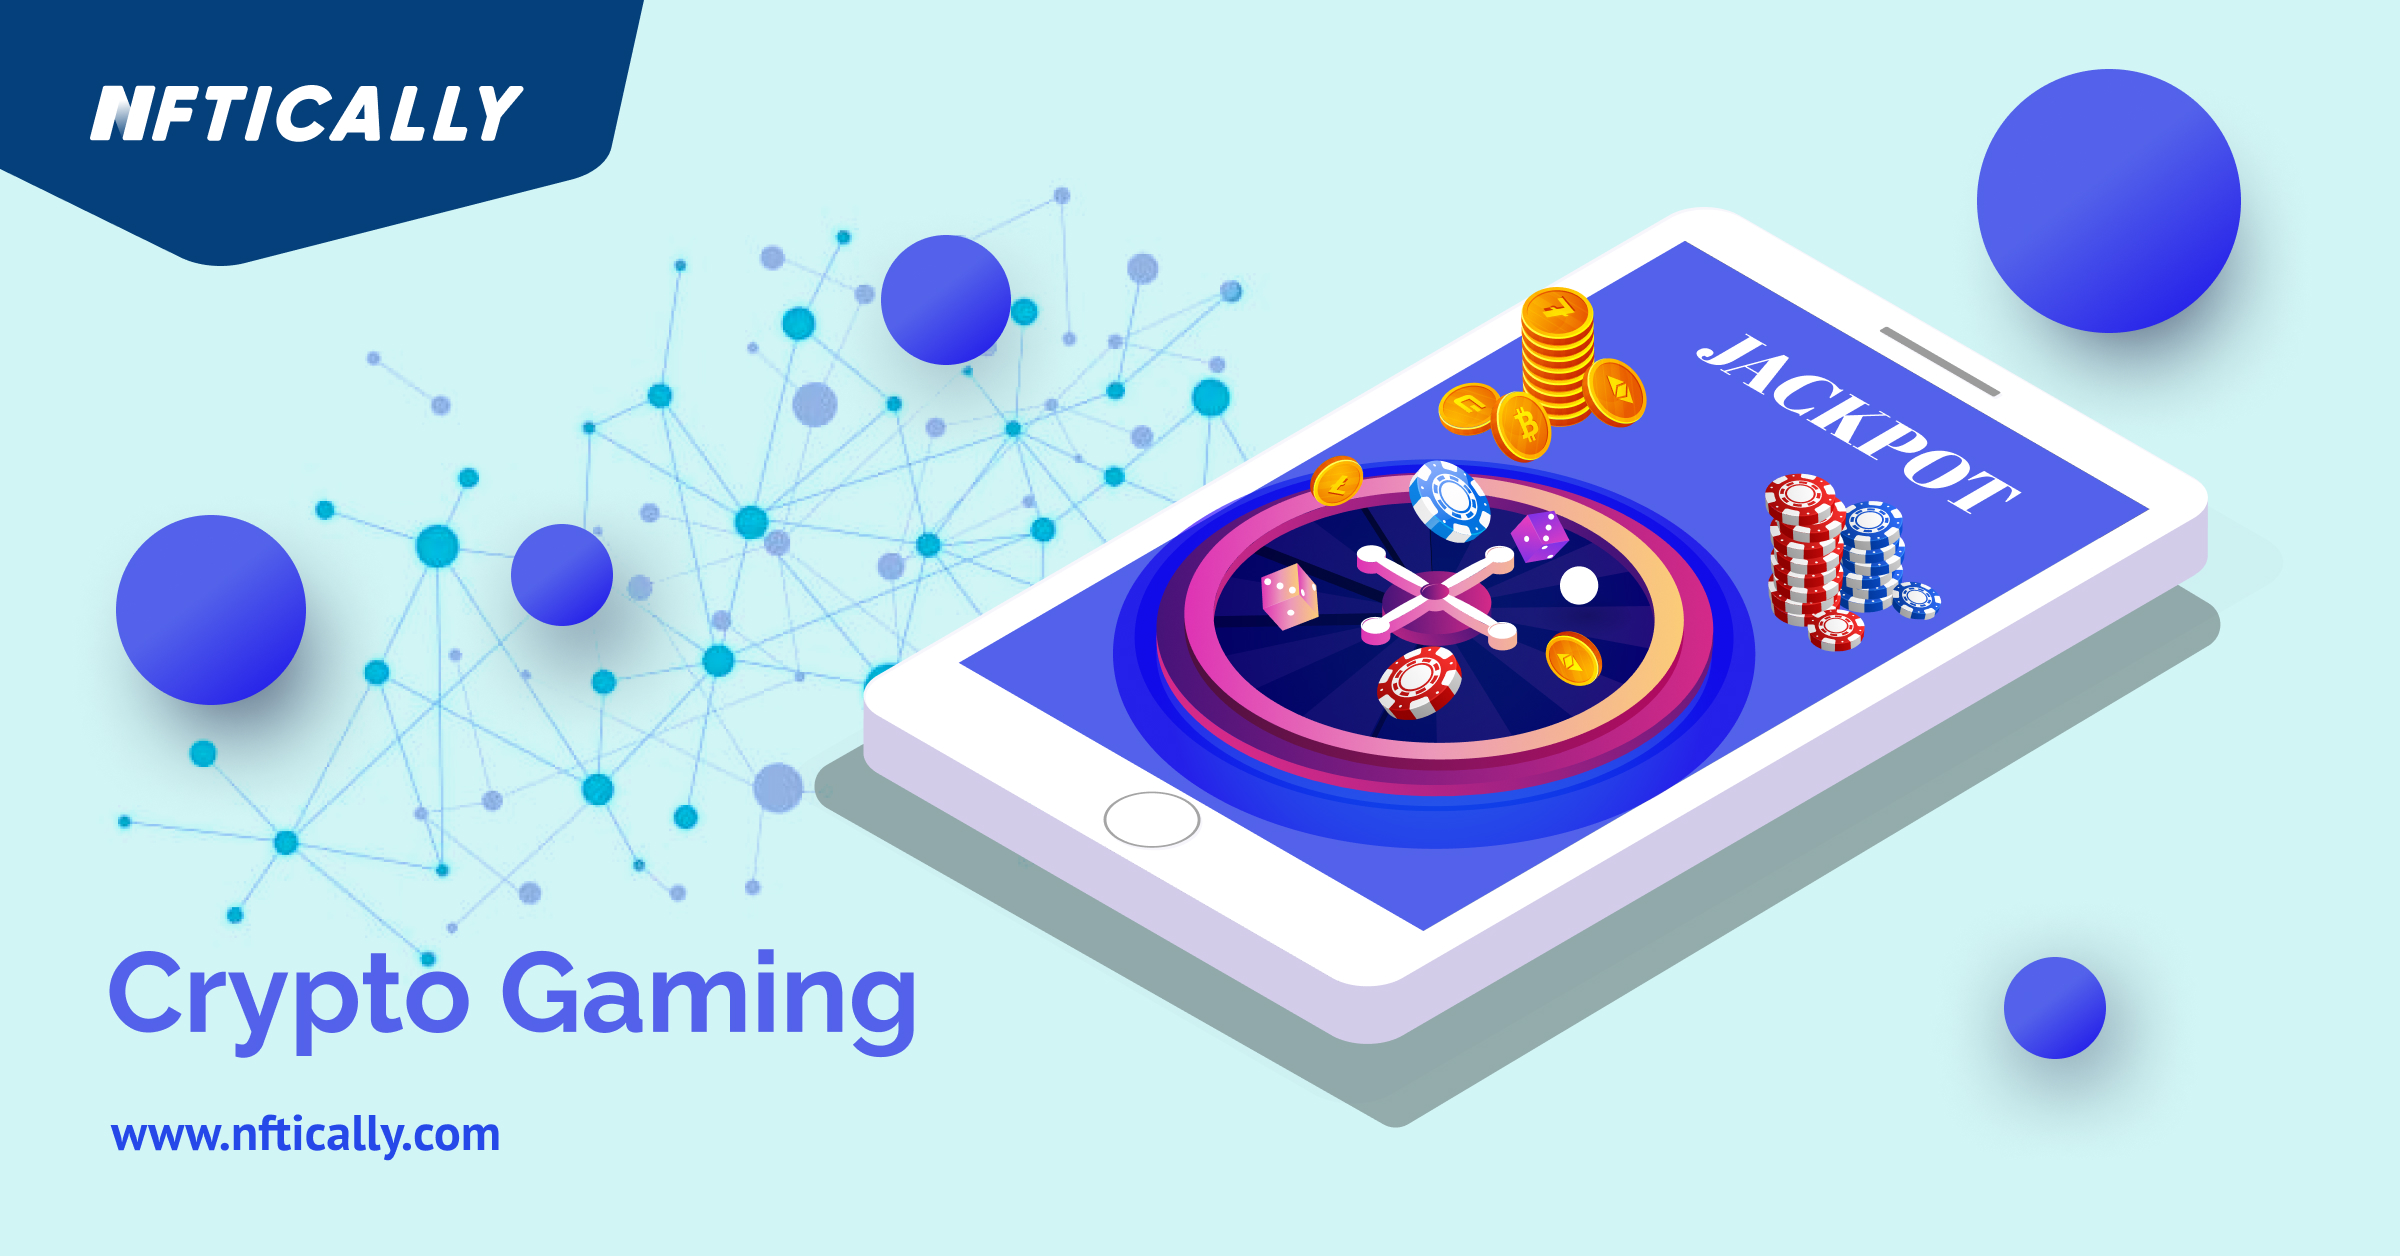 2022 is The Year of Crypto Gaming & Gaming NFTs!